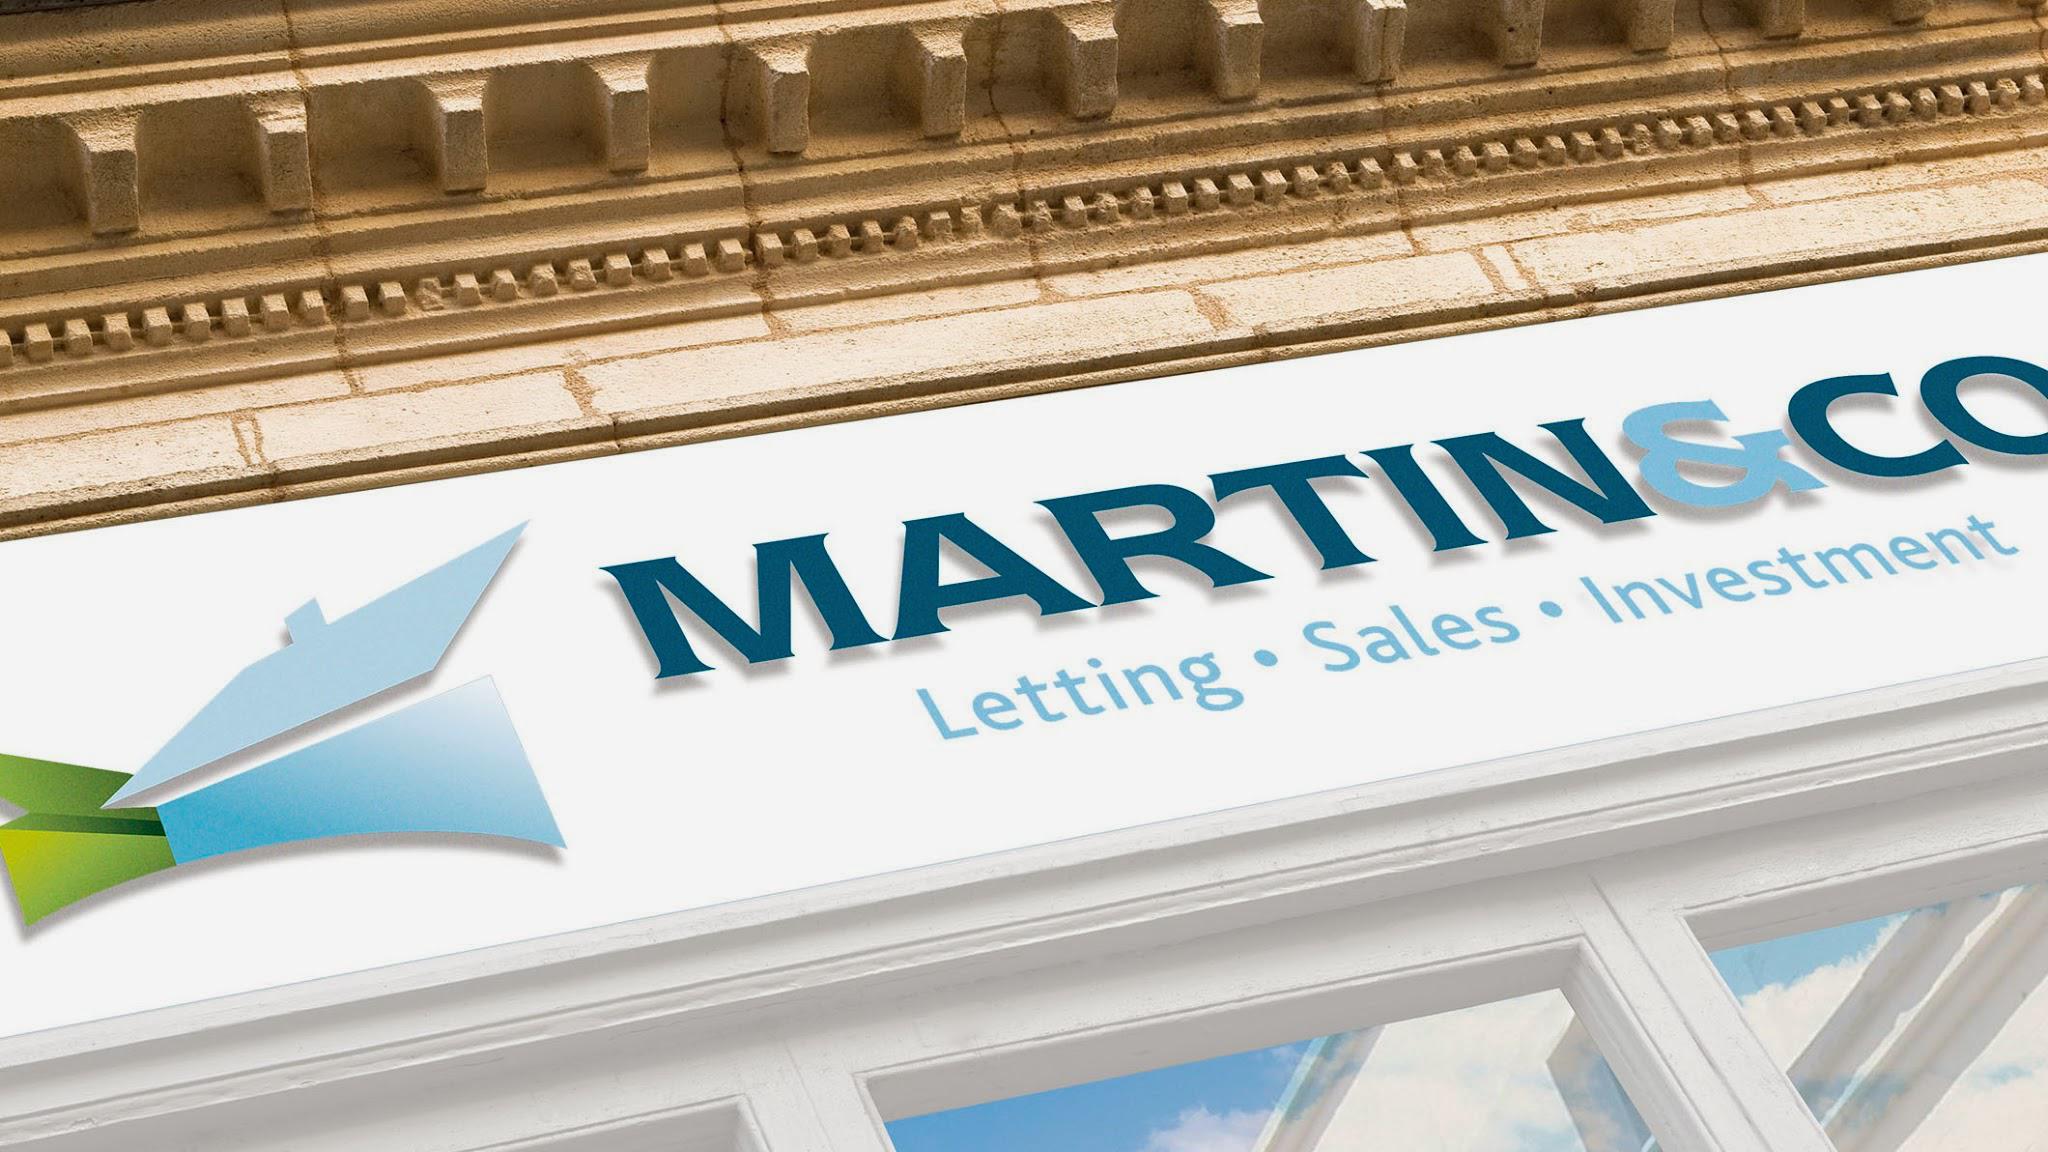 Images Martin & Co Leeds City Lettings & Estate Agents